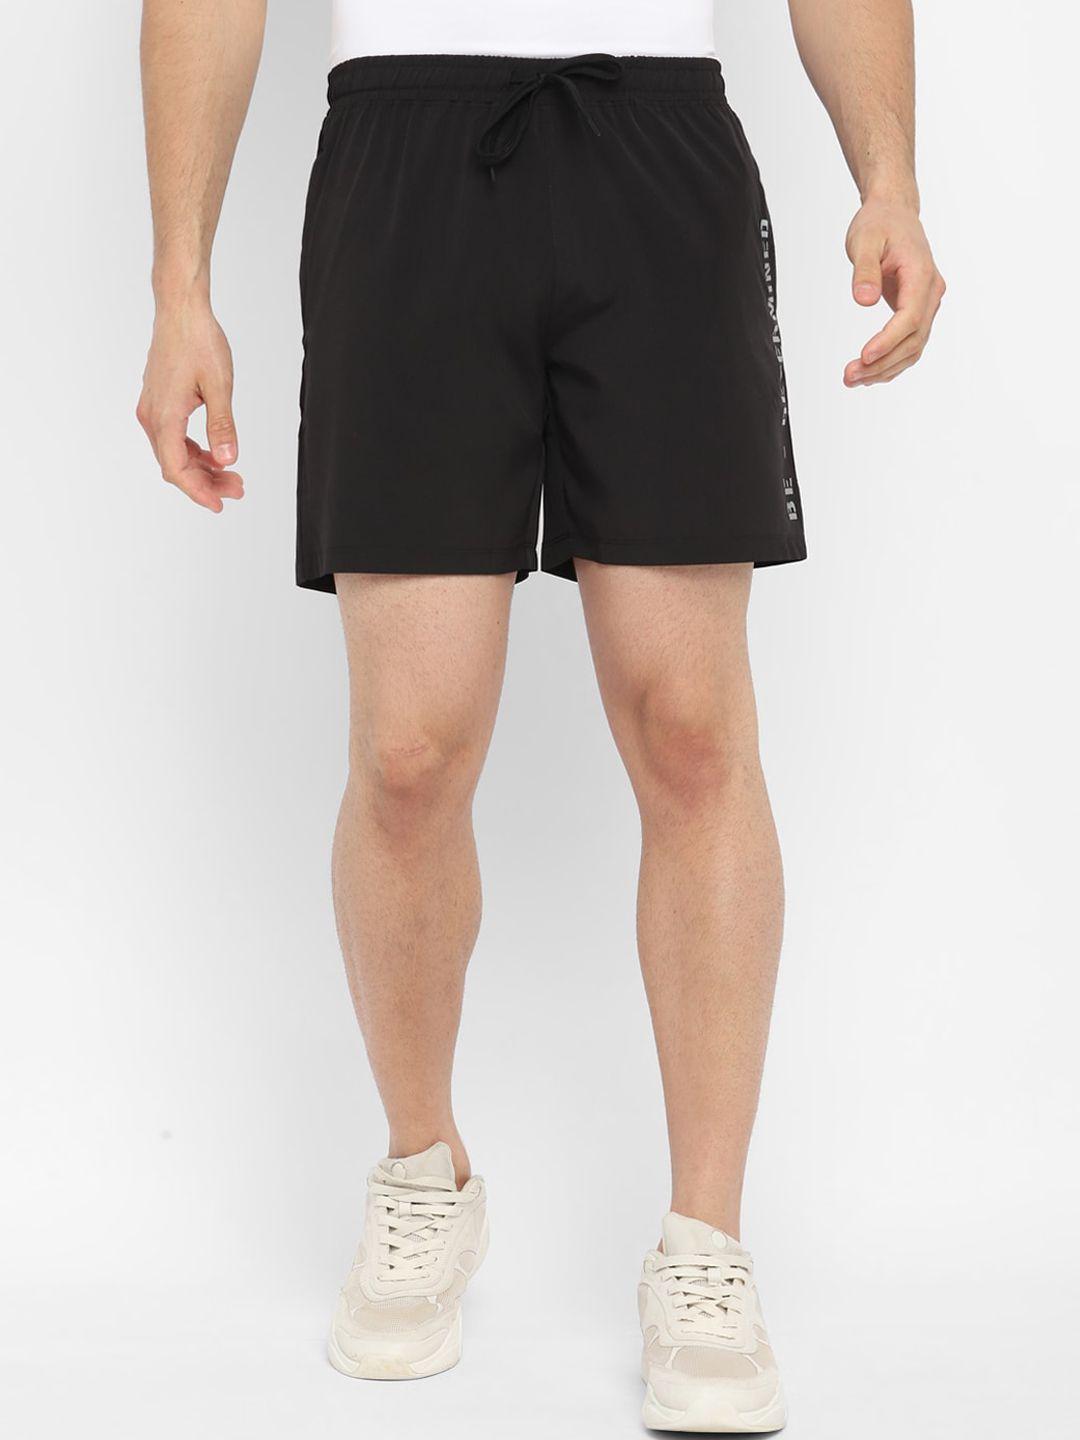 yuuki men black training or gym sports shorts with antimicrobial technology